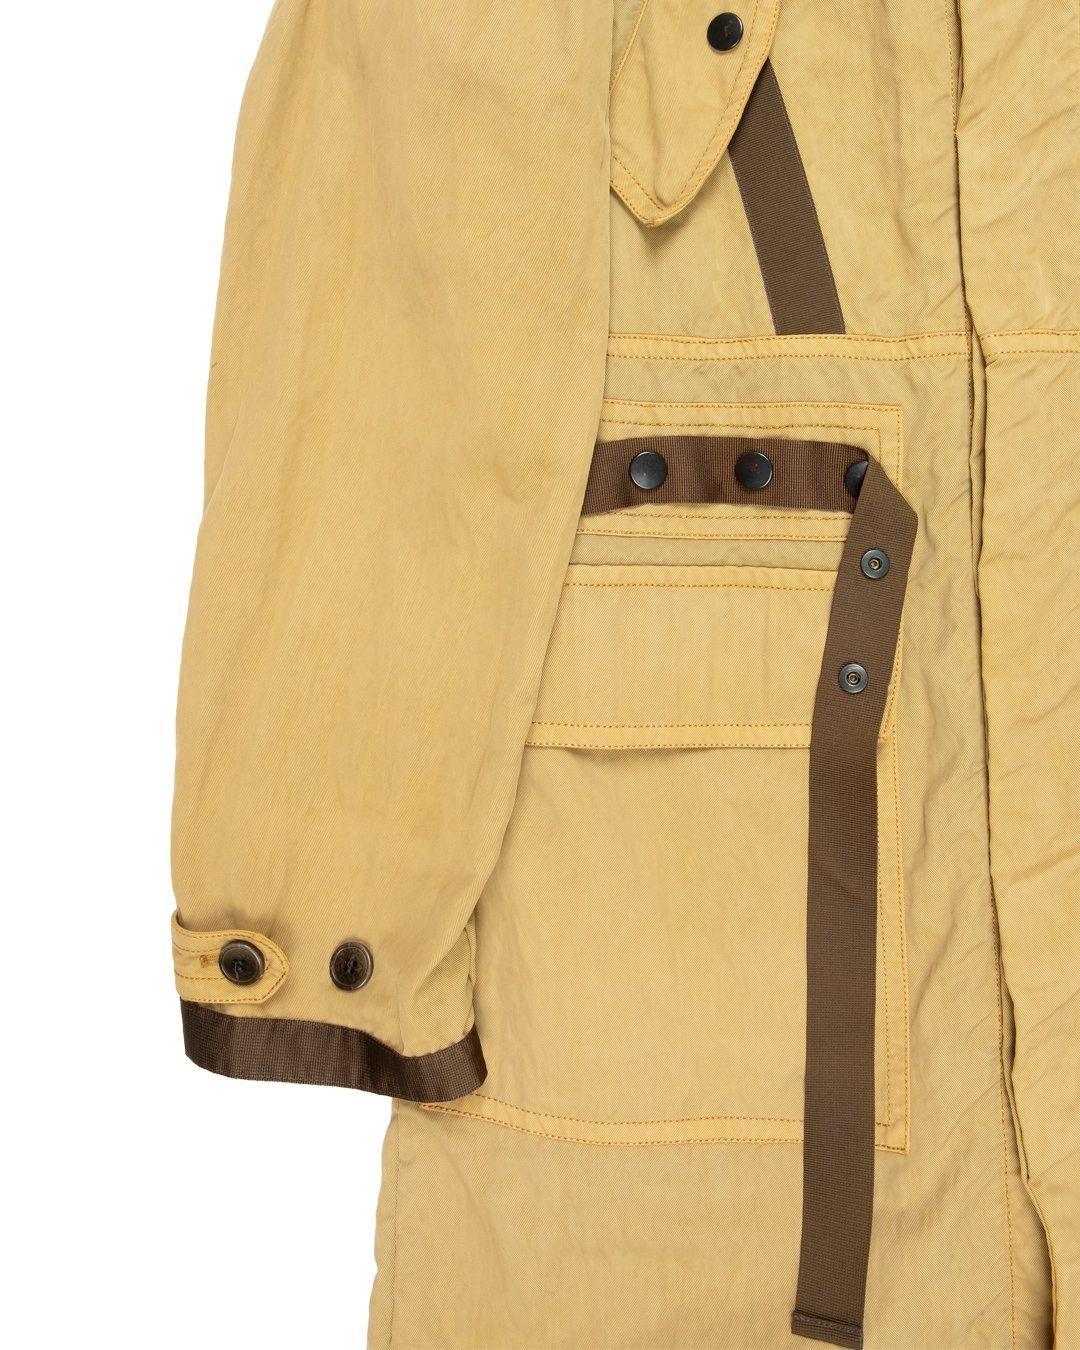 Dries Van Noten AW2014 Strapped Parka In Excellent Condition For Sale In Beverly Hills, CA